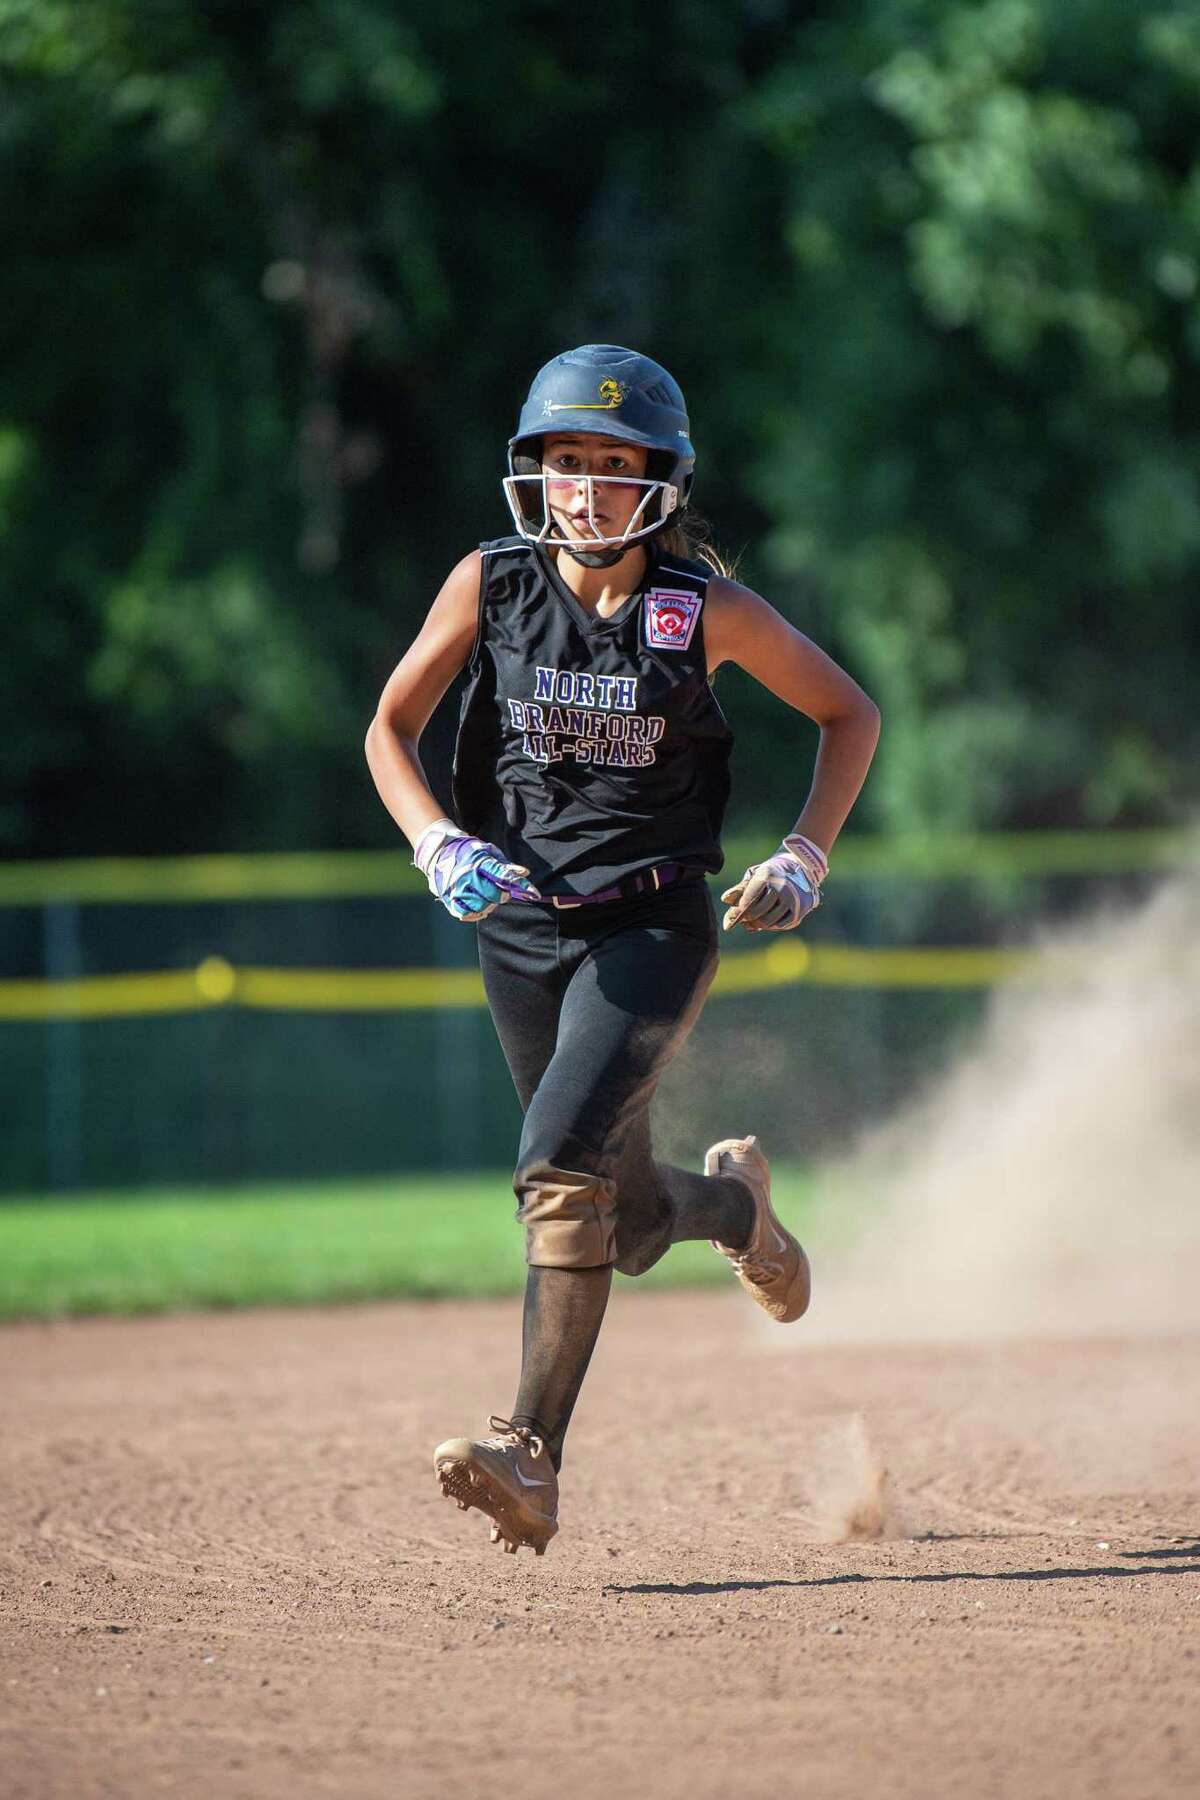 North Branford’s Lindsey Onofrio heads to third during the District IV championship game, Friday, July 5, 2019, at Foote Field in Milford, CT